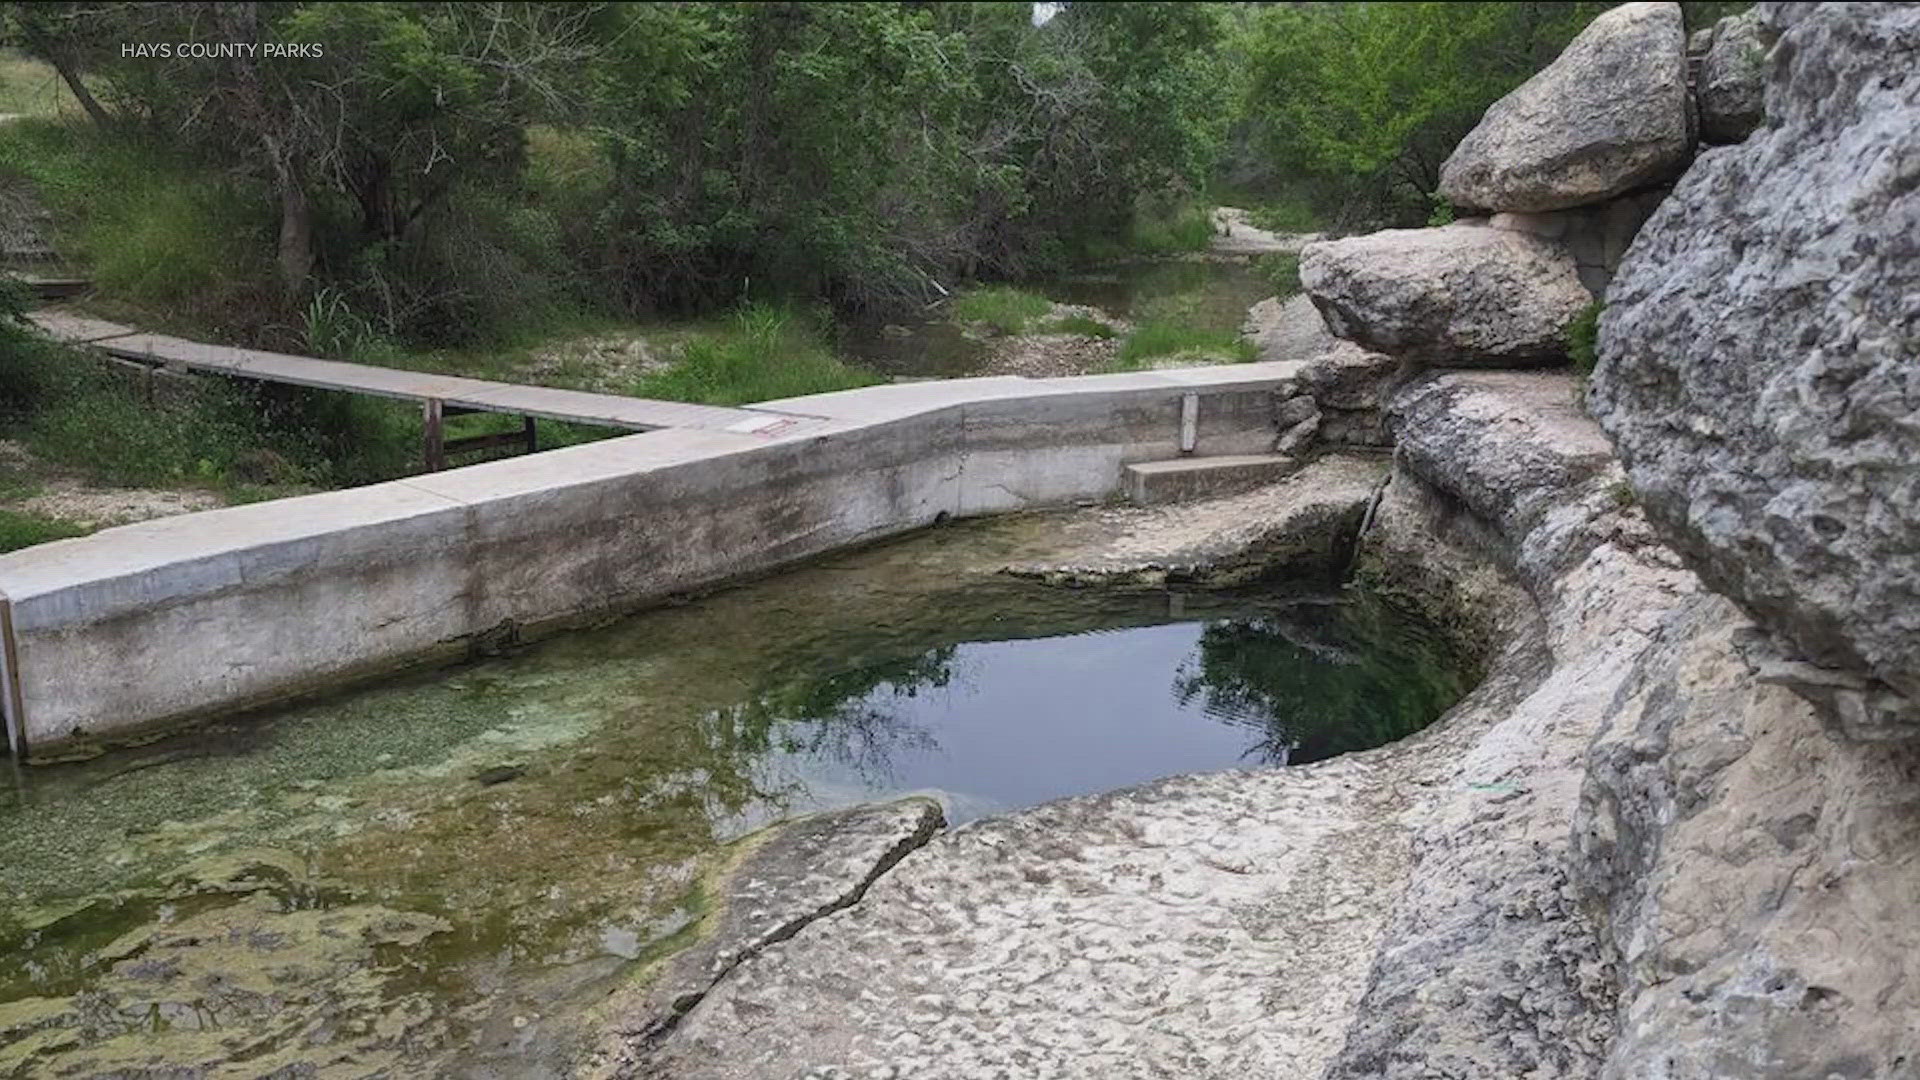 The complaint alleges the company serves its customers with an illegal groundwater supply.